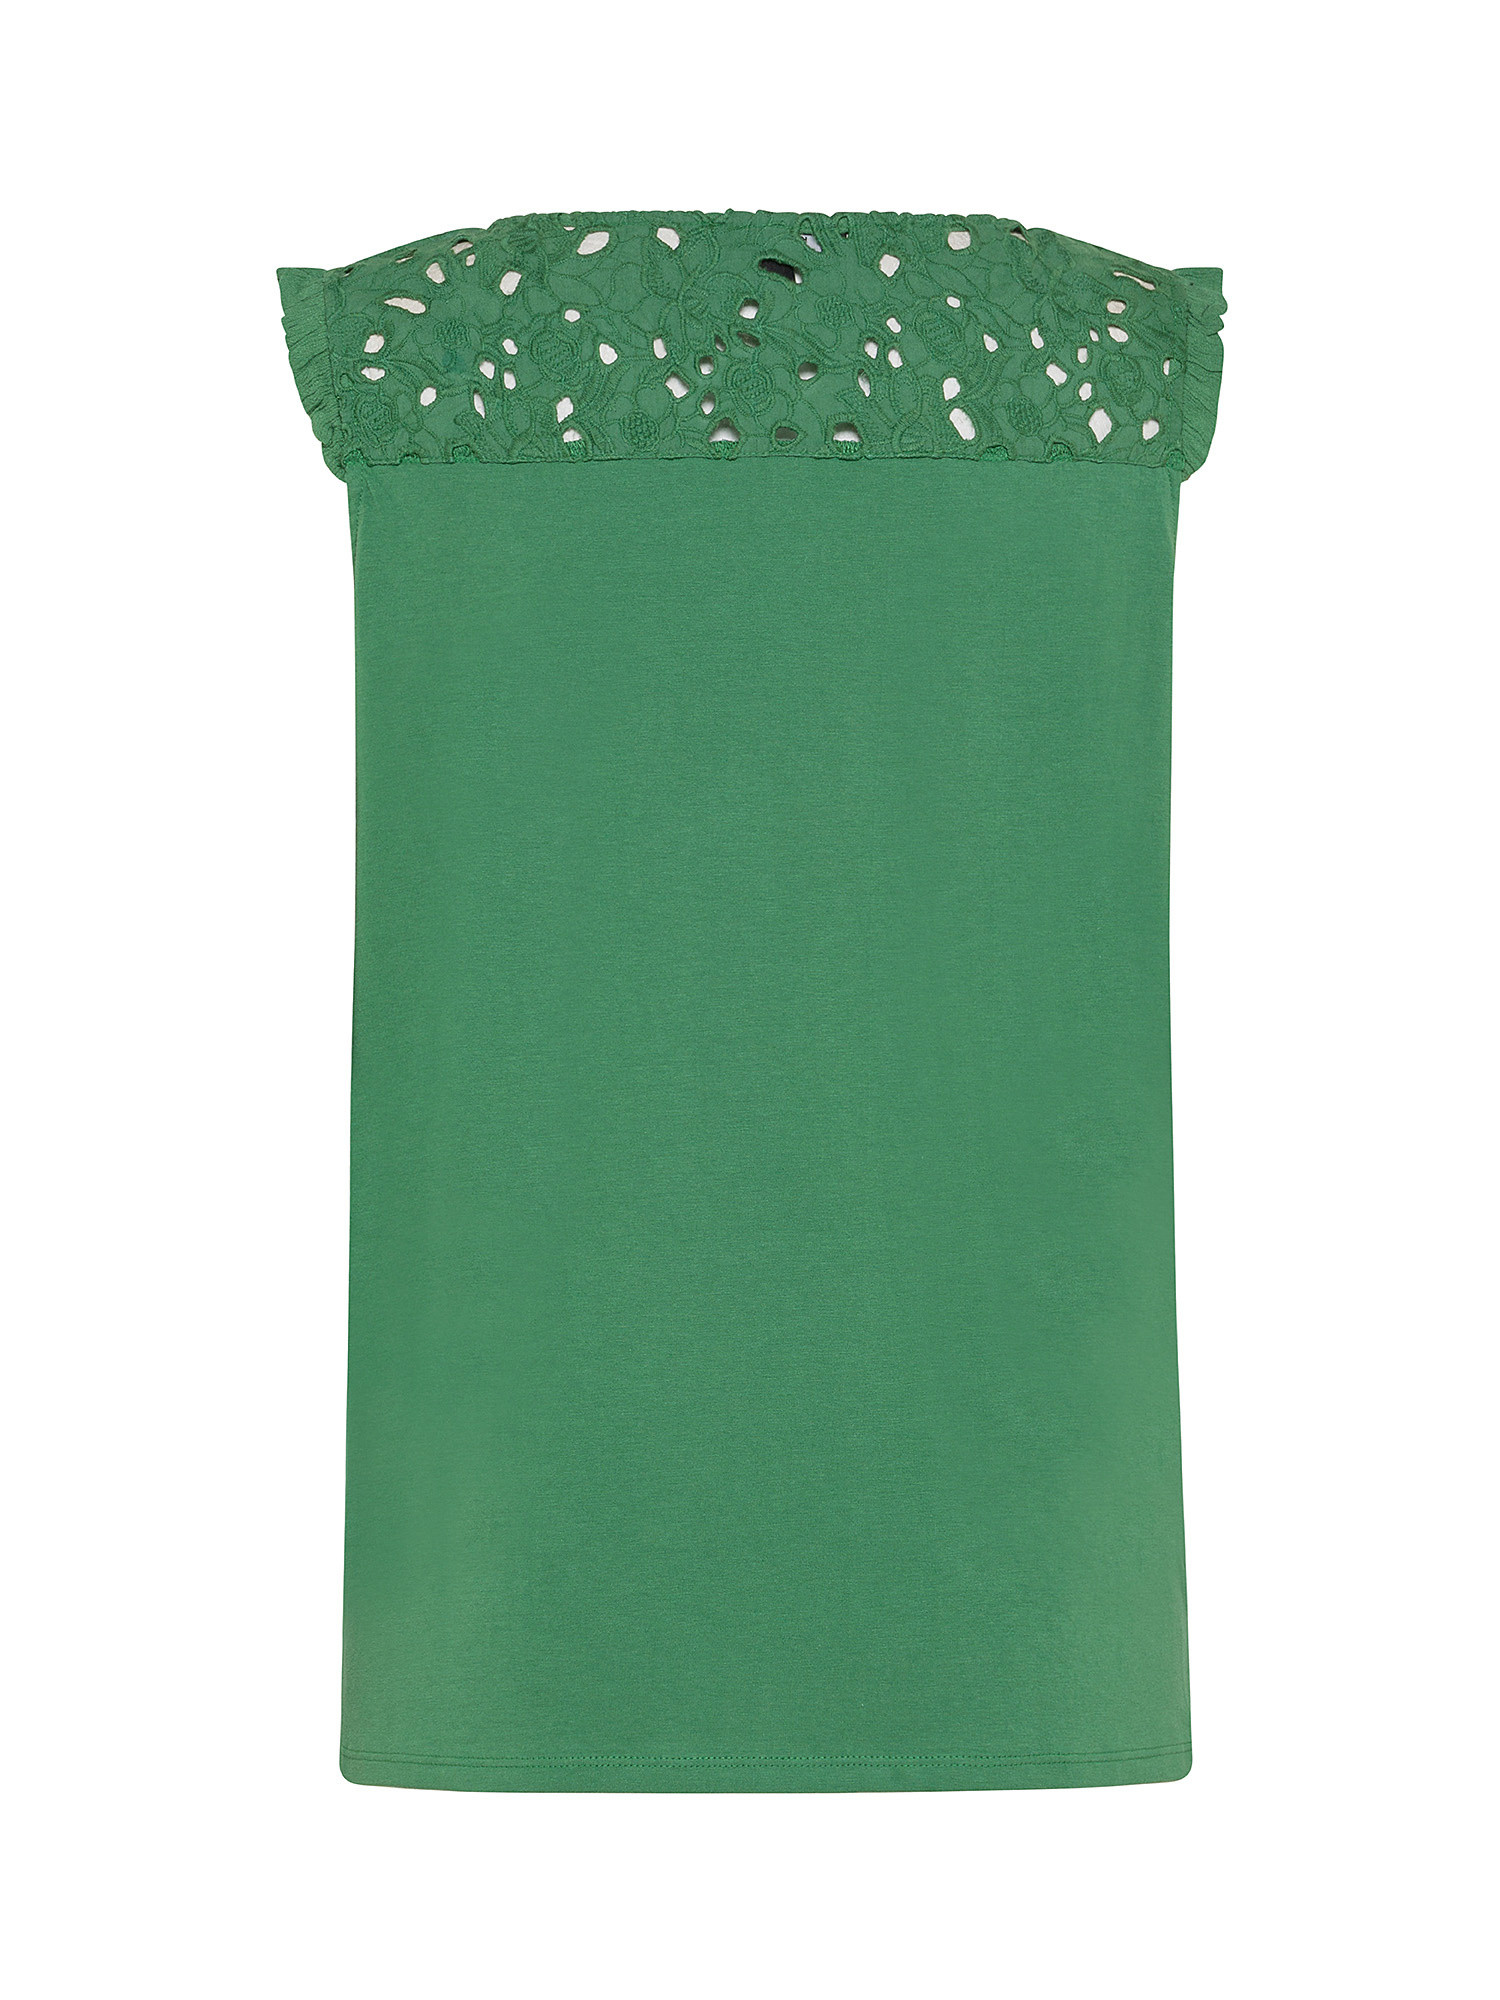 Koan - Camisole with lace, Dark Green, large image number 1